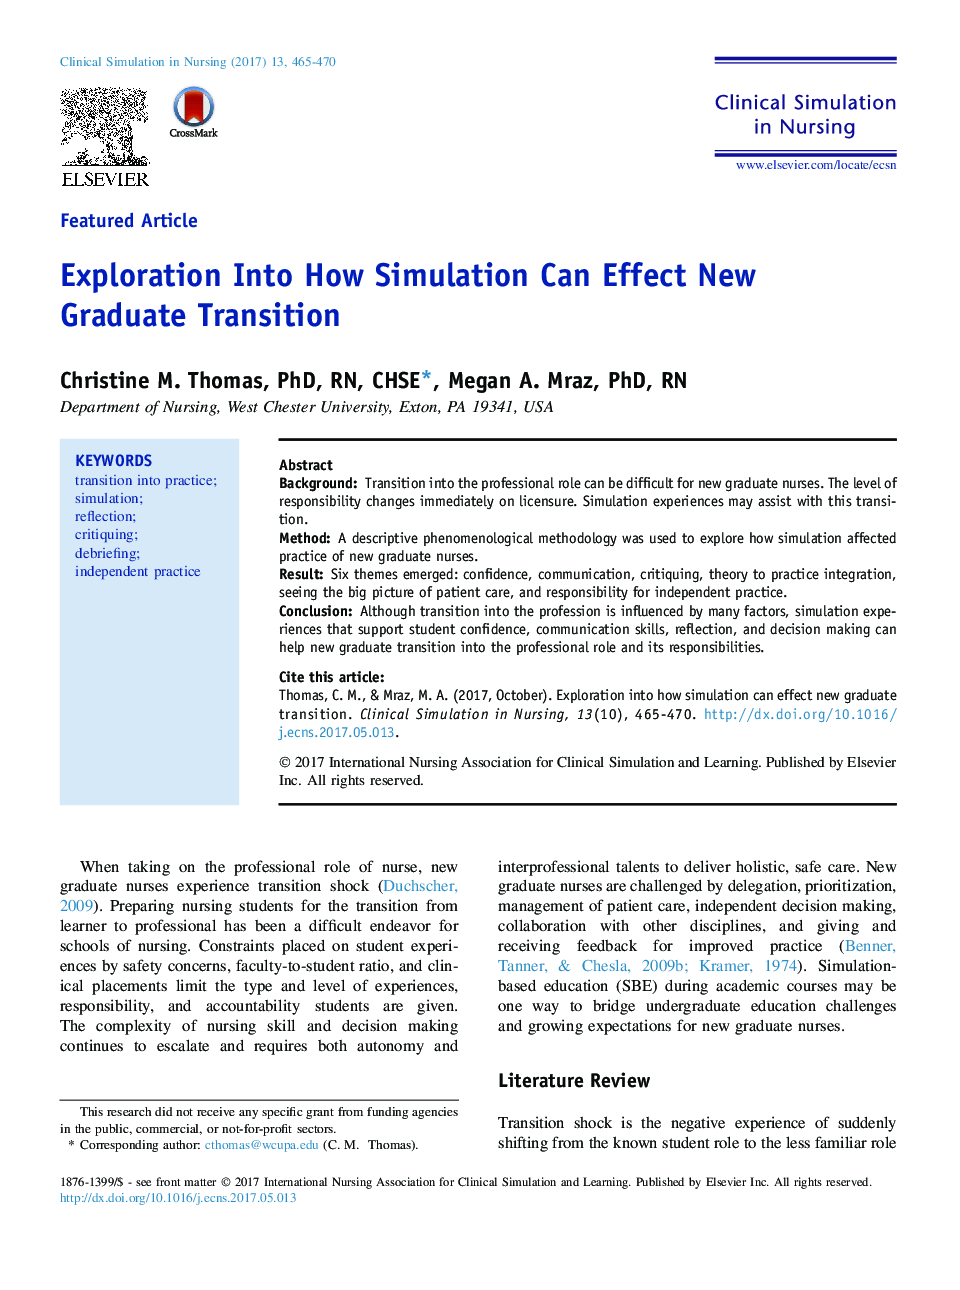 Exploration Into How Simulation Can Effect New Graduate Transition